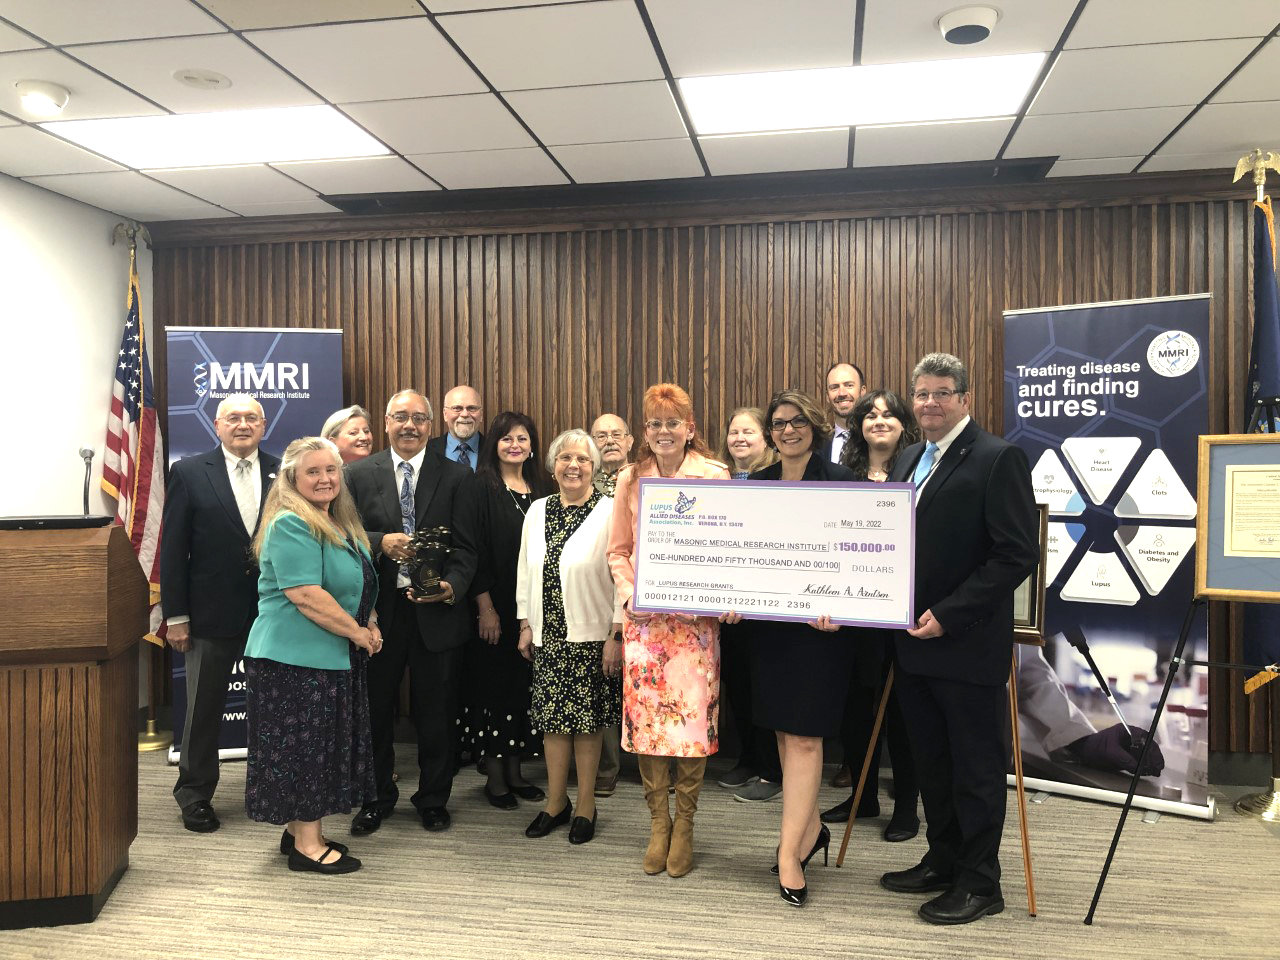 Officials with the Lupus and Allied Diseases Association, Inc. (LADA), present a check for $150,000 to the Masonic Medical Research Institute during an event Thursday. The organizations have teamed up to observe May as Lupus Awareness Month, and highlight their lupus research program.